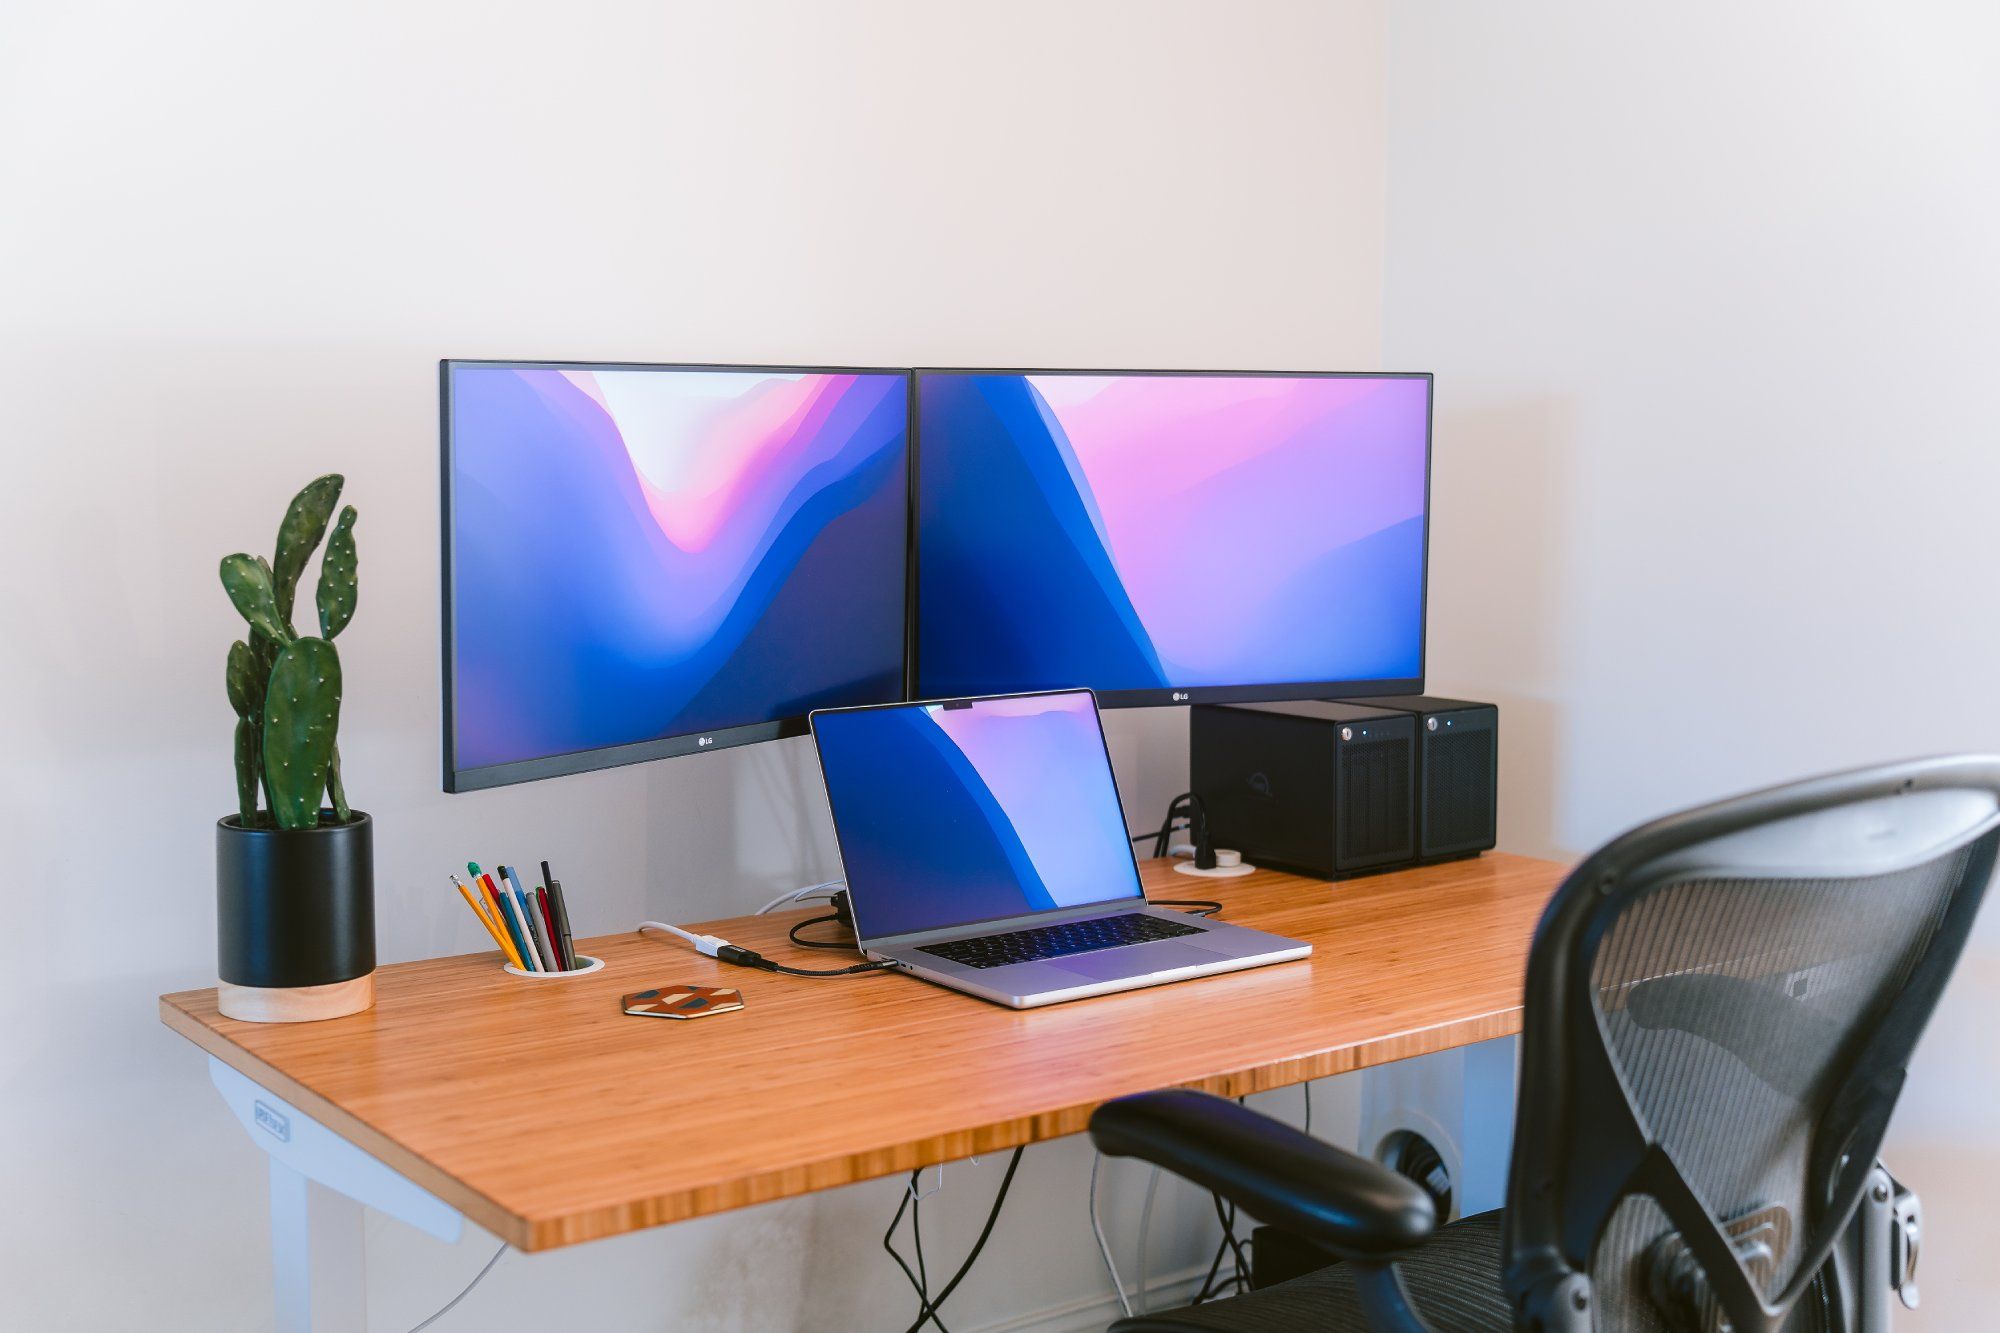 A modern workspace setup with dual LG monitors displaying gradient wallpapers. A laptop sits on the wooden desk, paired with a small collection of coloured pens and a decorative coaster. To the left of the workspace is a potted cactus plant, adding a touch of nature to the room. An office chair with a mesh back is partially visible, indicating a comfortable seating area